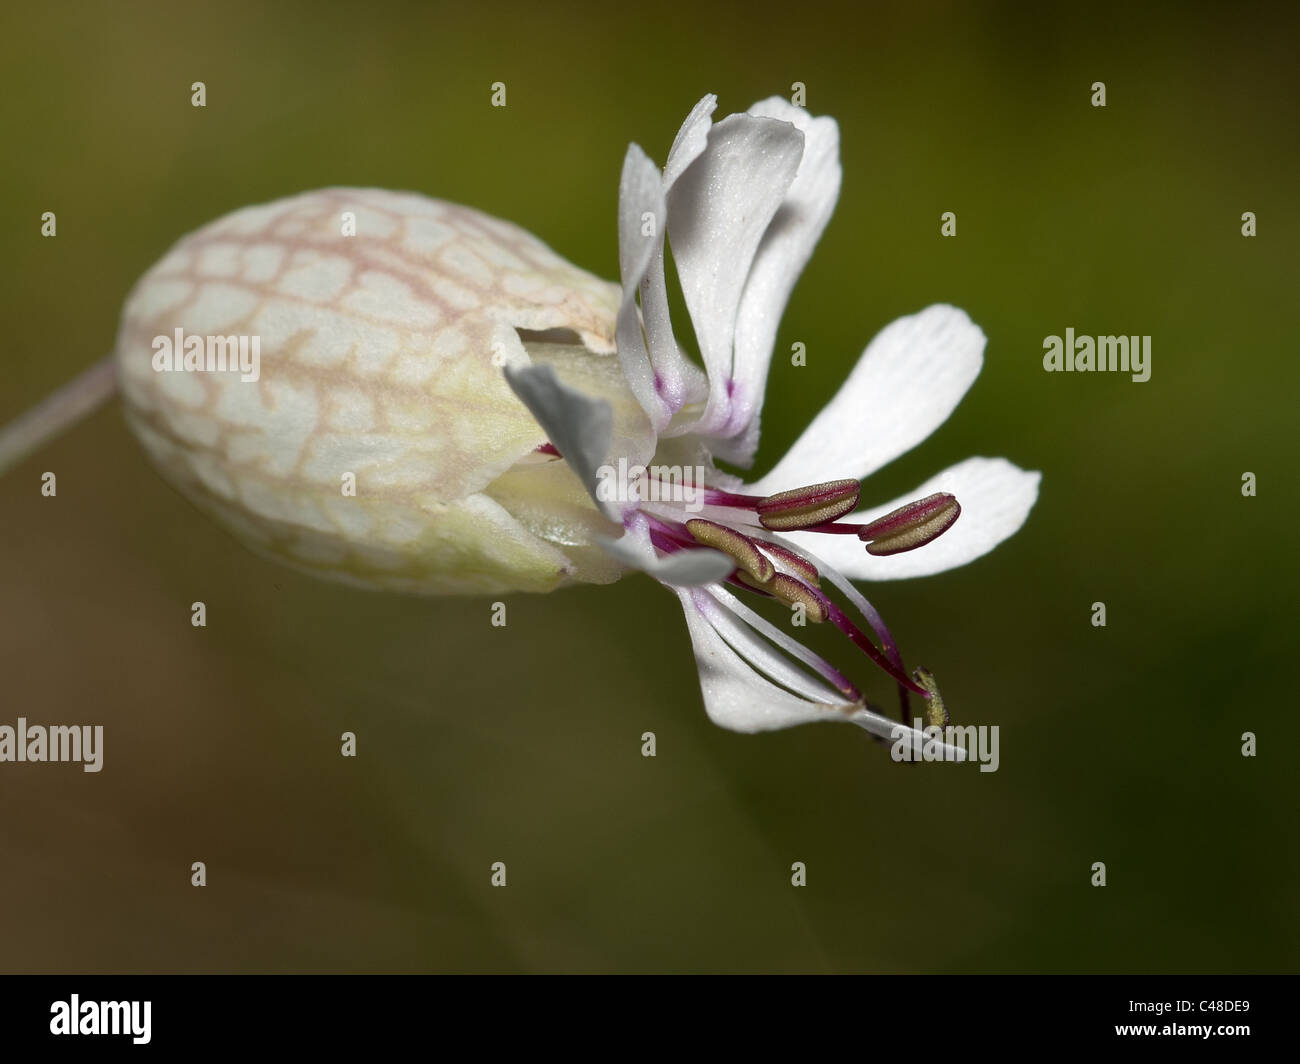 Bladder campion, Silene vulgaris, portrait of flower with out focus background. Stock Photo